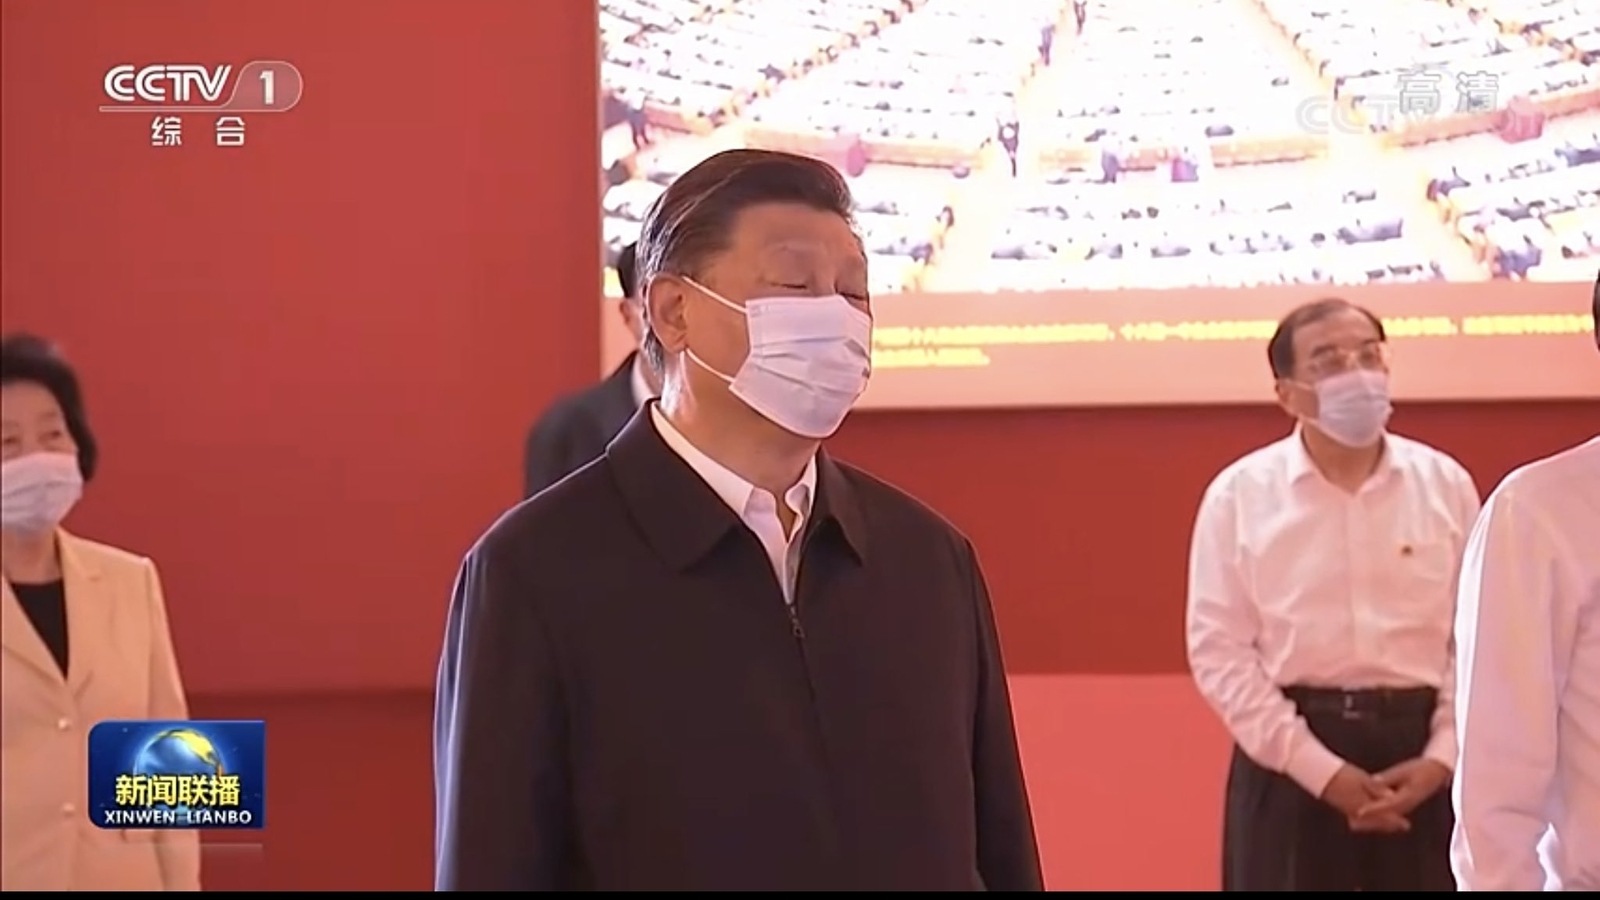 video-xi-jinping-makes-first-public-appearance-since-sco-meet-in-mid-september